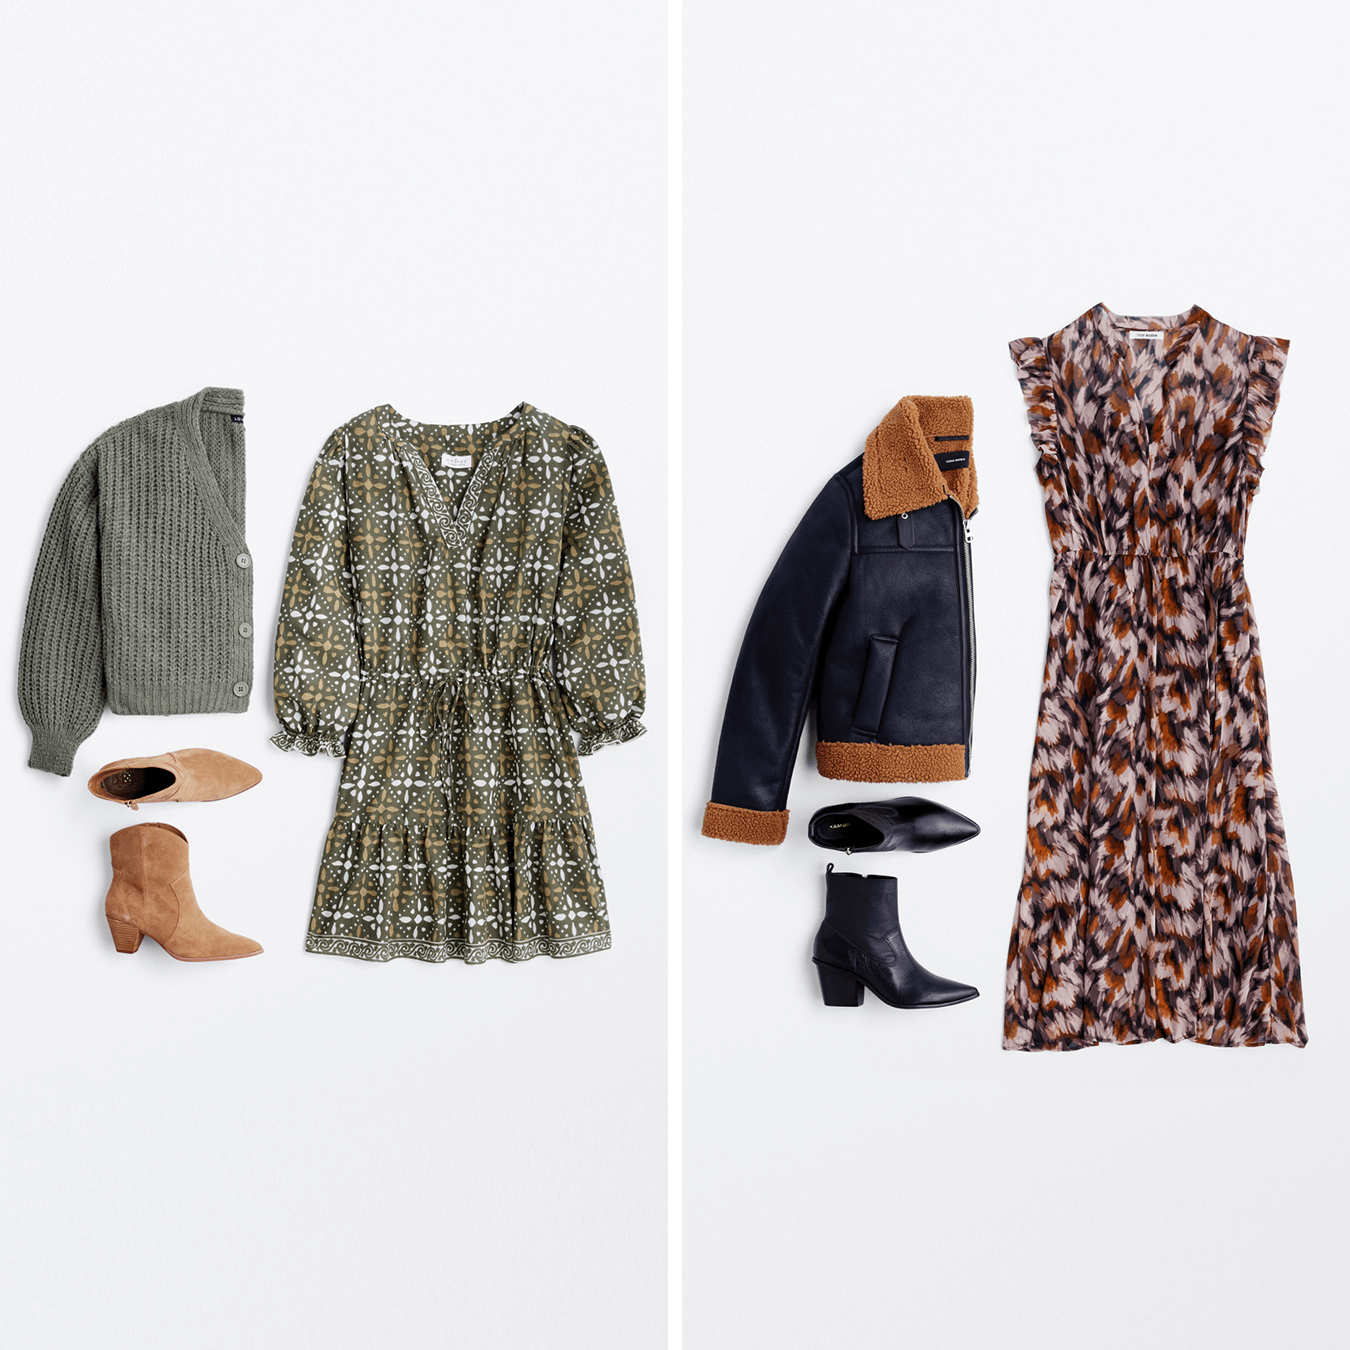 anytime dresses featuring boots and jackets for fall